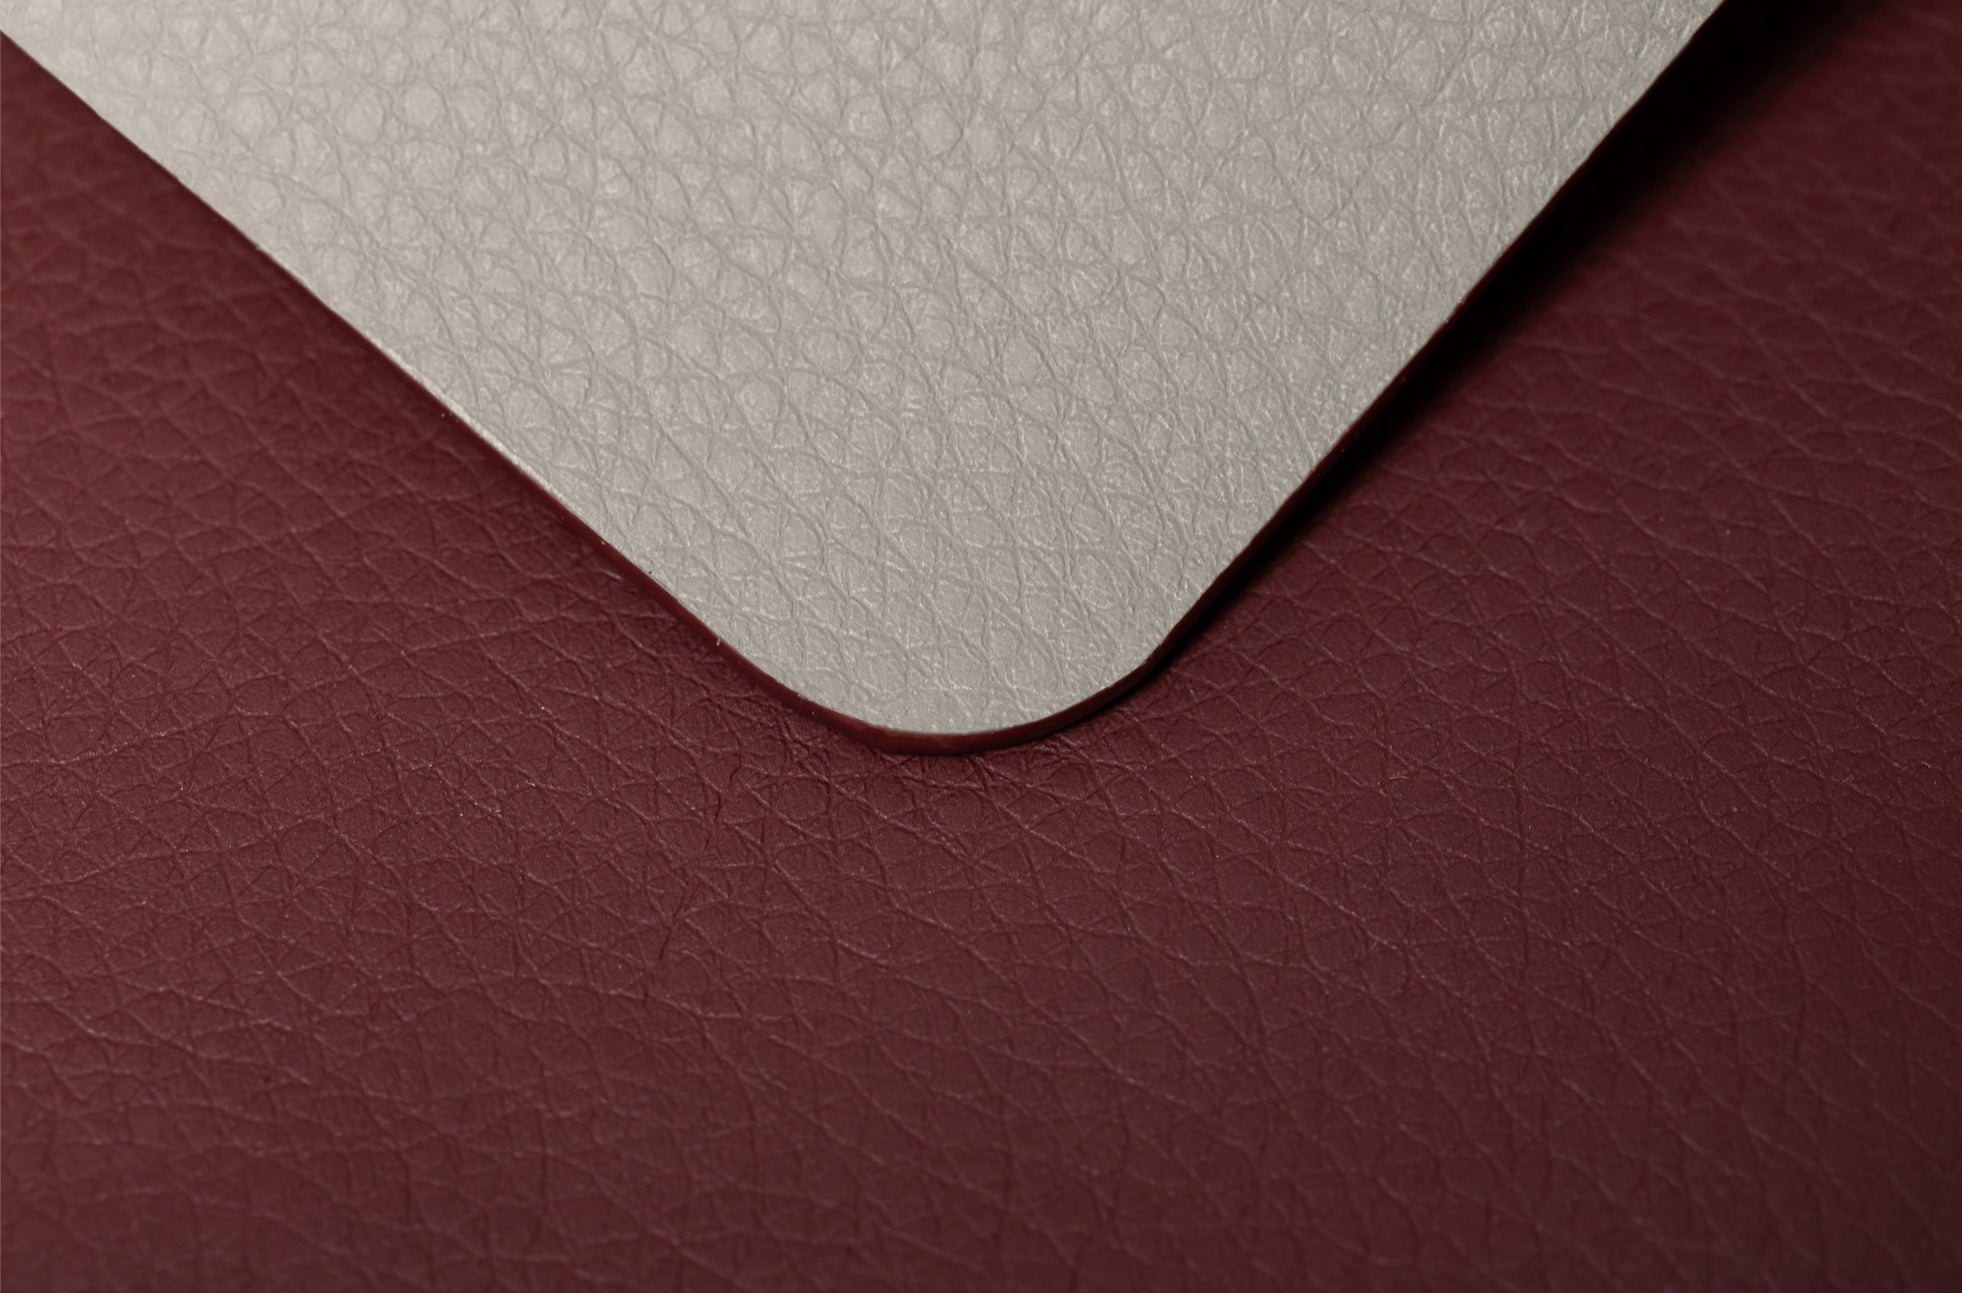 The Placemat Set - Sample Sale in Technik in Stone & Burgundy image 7